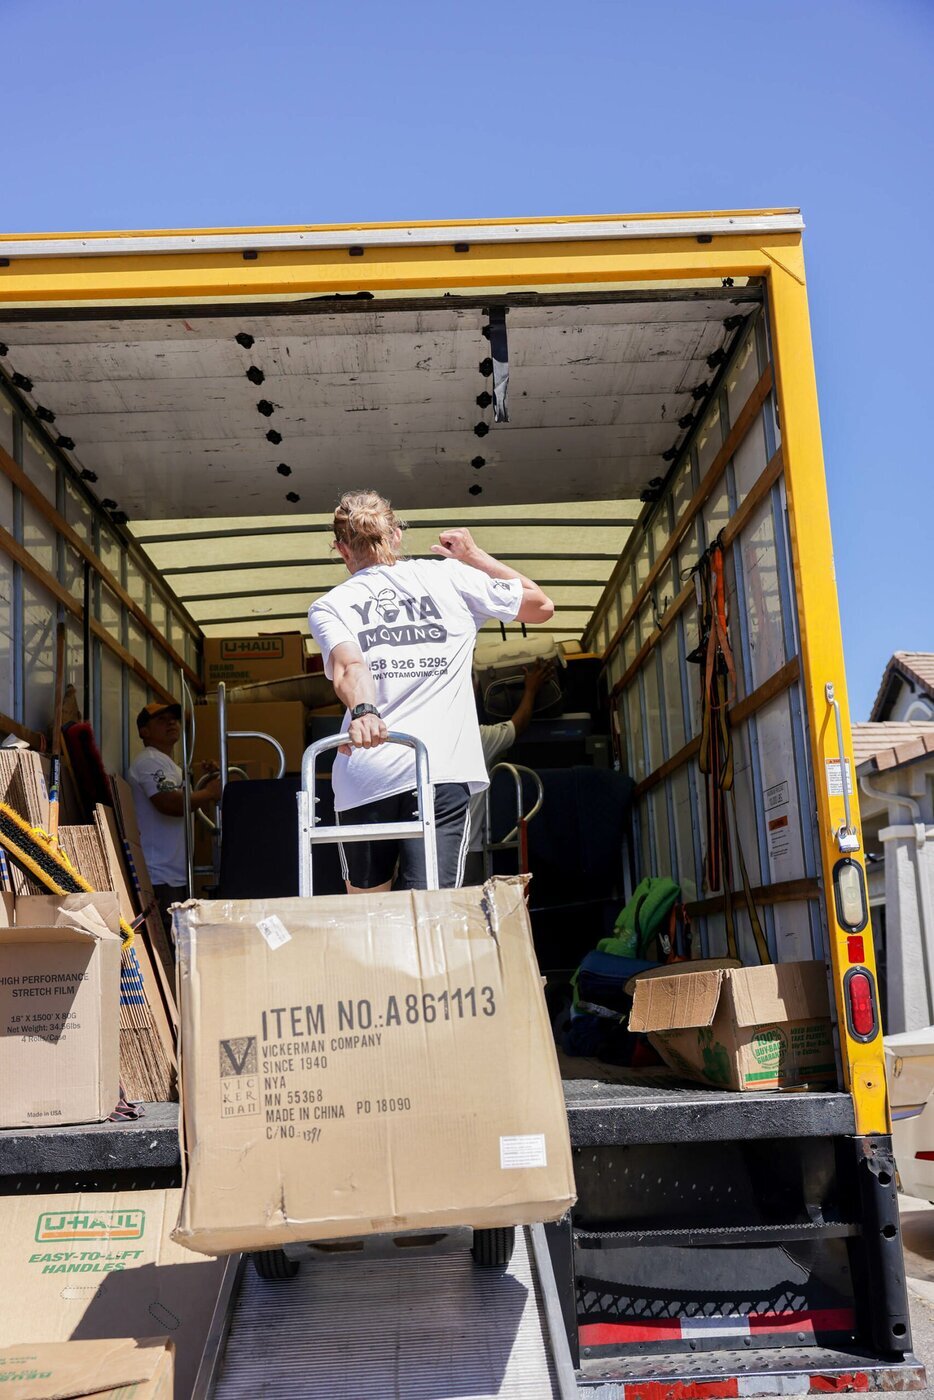 YOTA Moving is a family-owned, fully licensed, and insured company that has become the go-to name for all moving and packing needs of the people of San Diego and surrounding areas